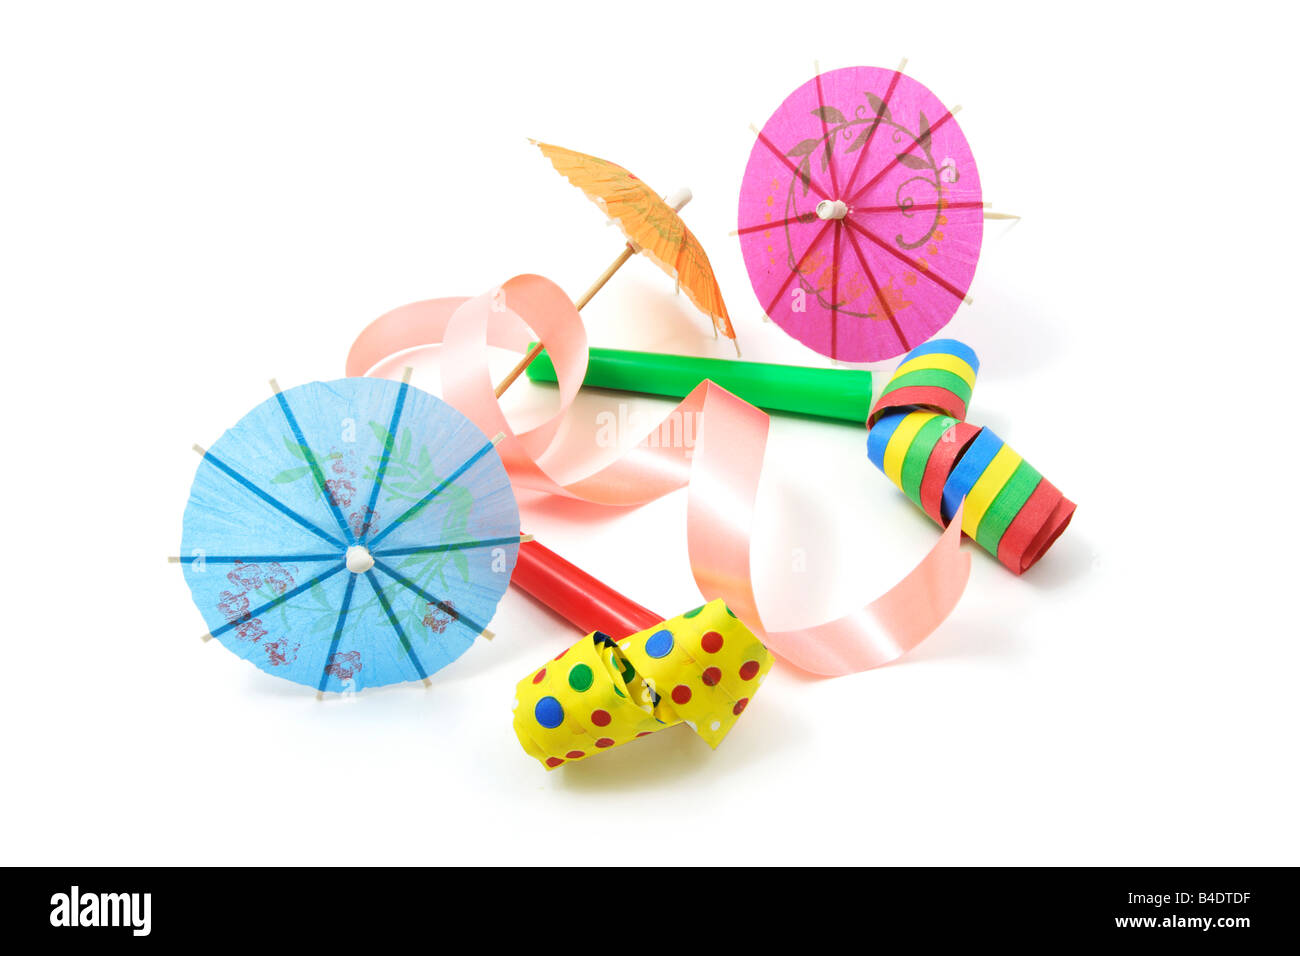 Party Blowers and Cocktail Umbrellas Stock Photo